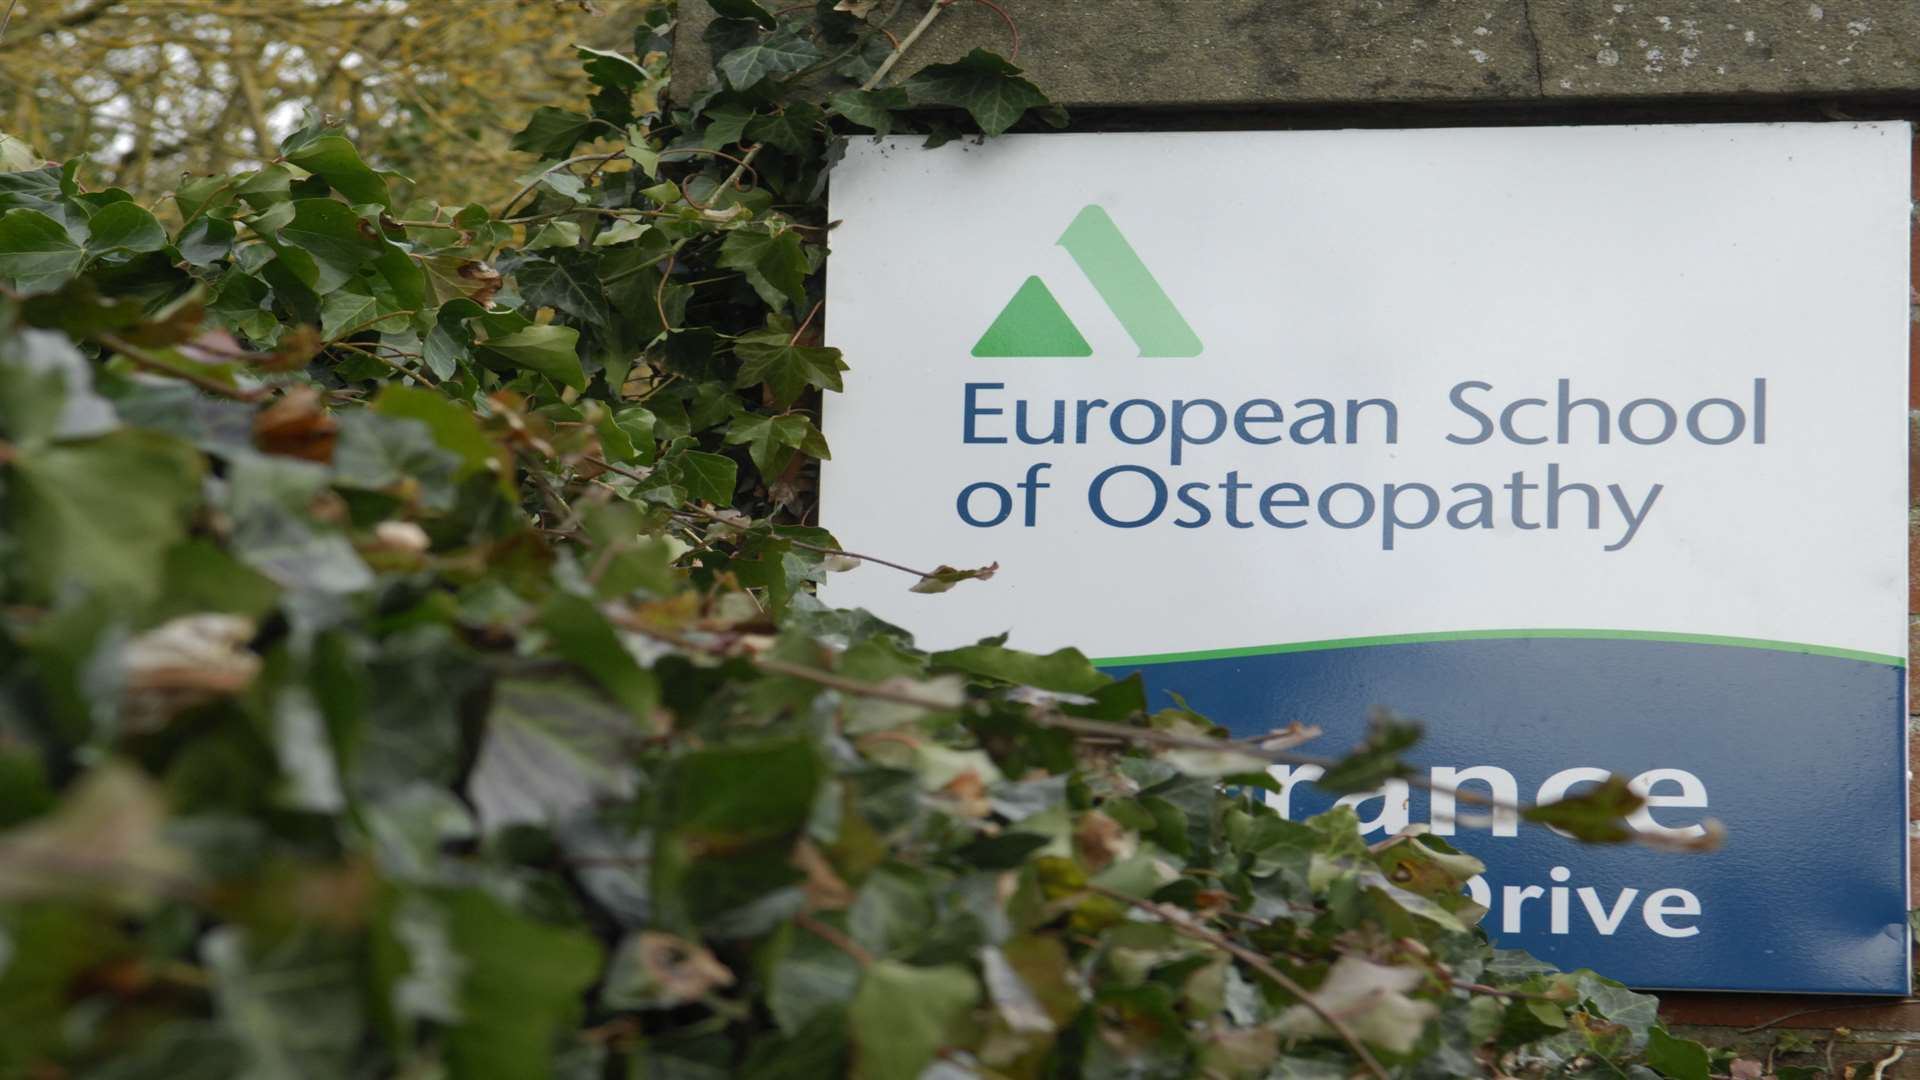 The European School of Osteopathy is based at Boxley House, Boxley